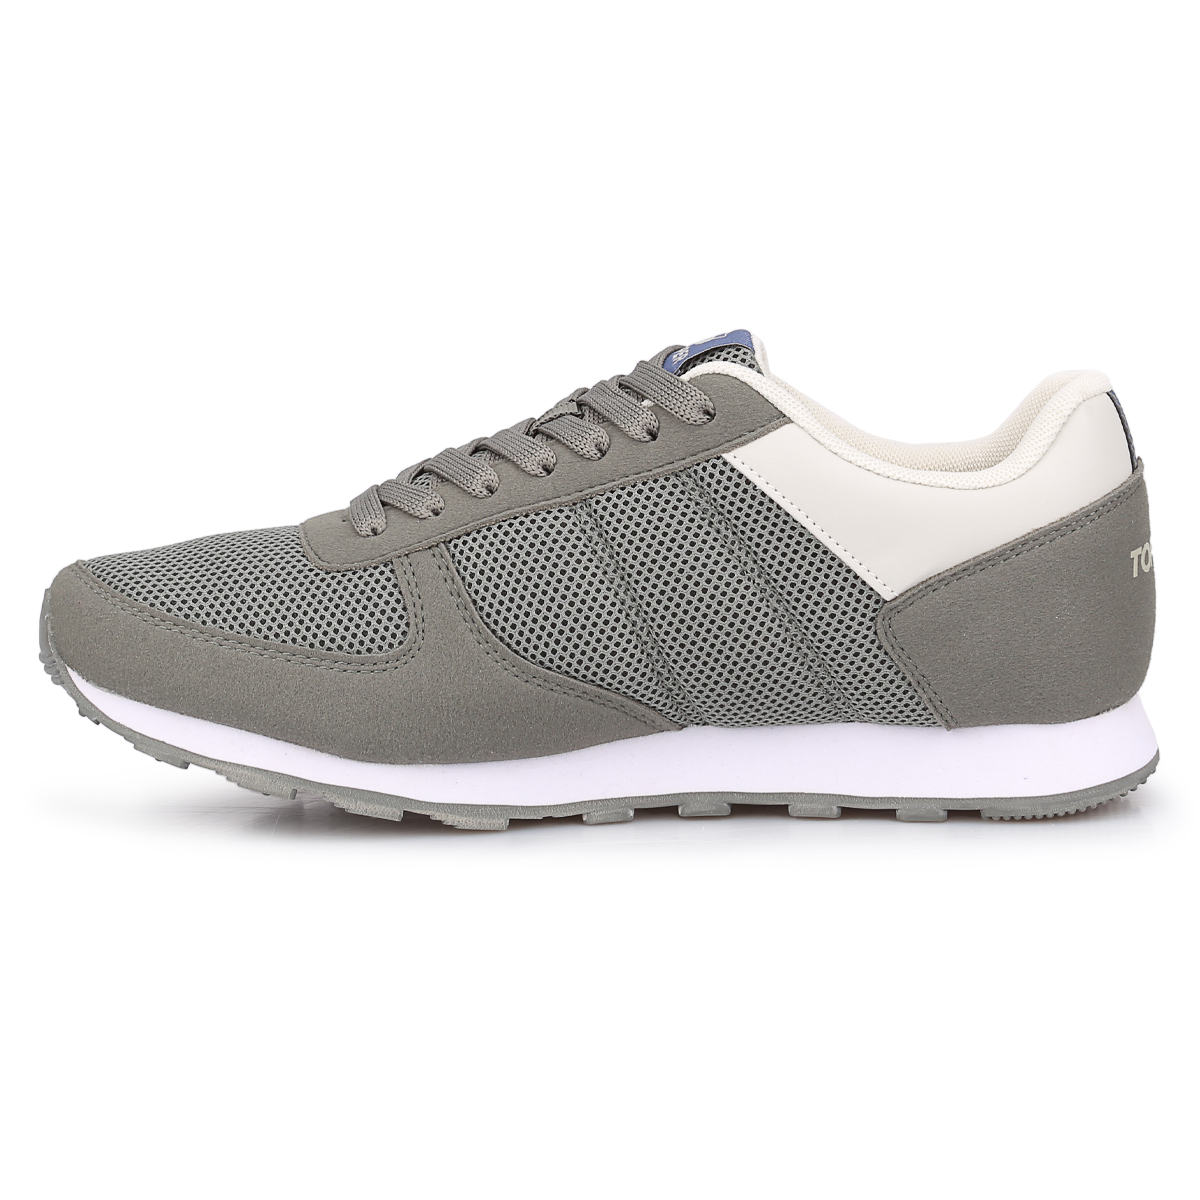 Zapatillas Topper T.350 Mesh,  image number null